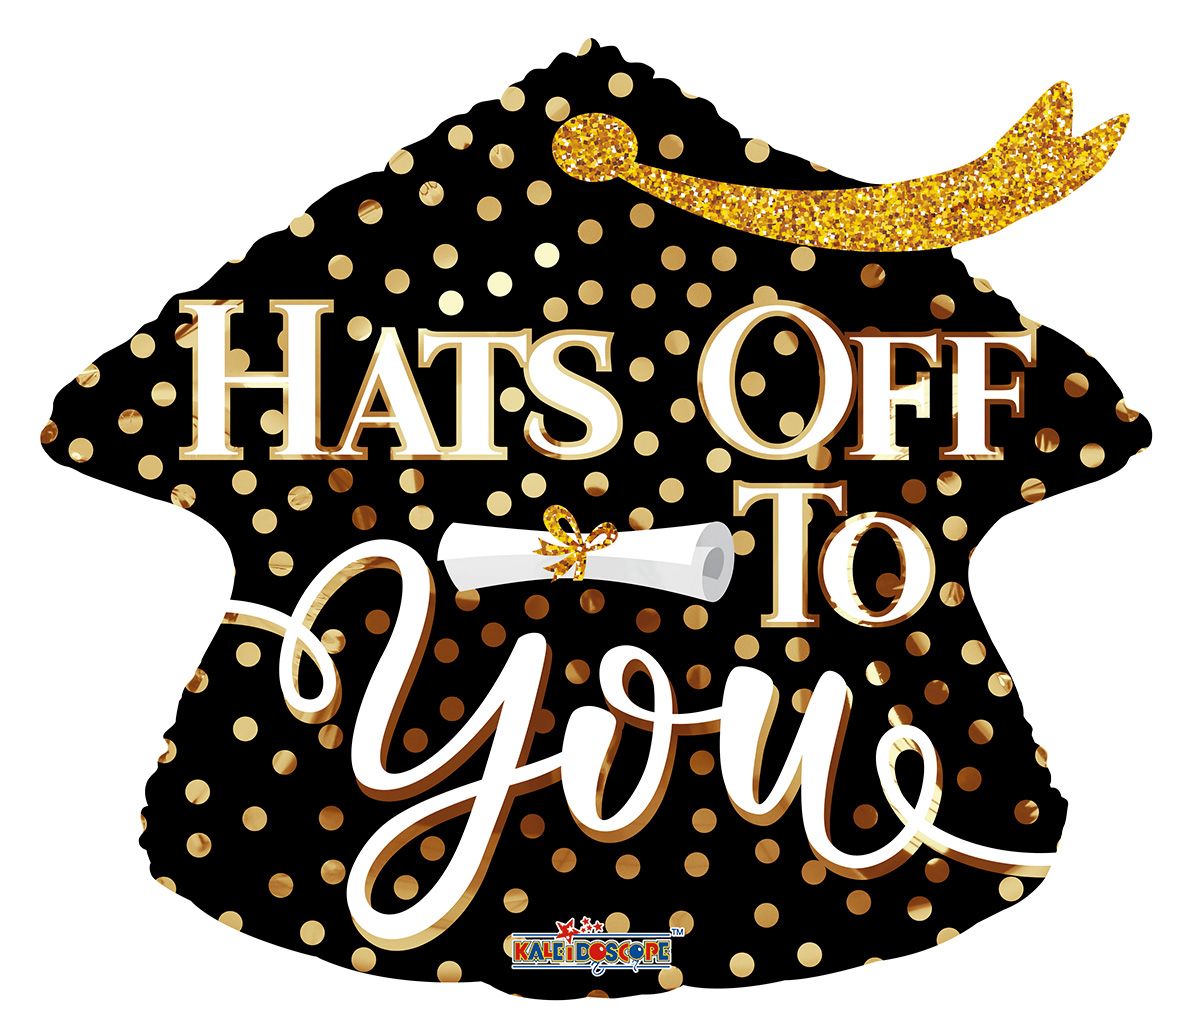 18" Hats Off to You Foil Balloon (P28) | Buy 5 Or More Save 20%